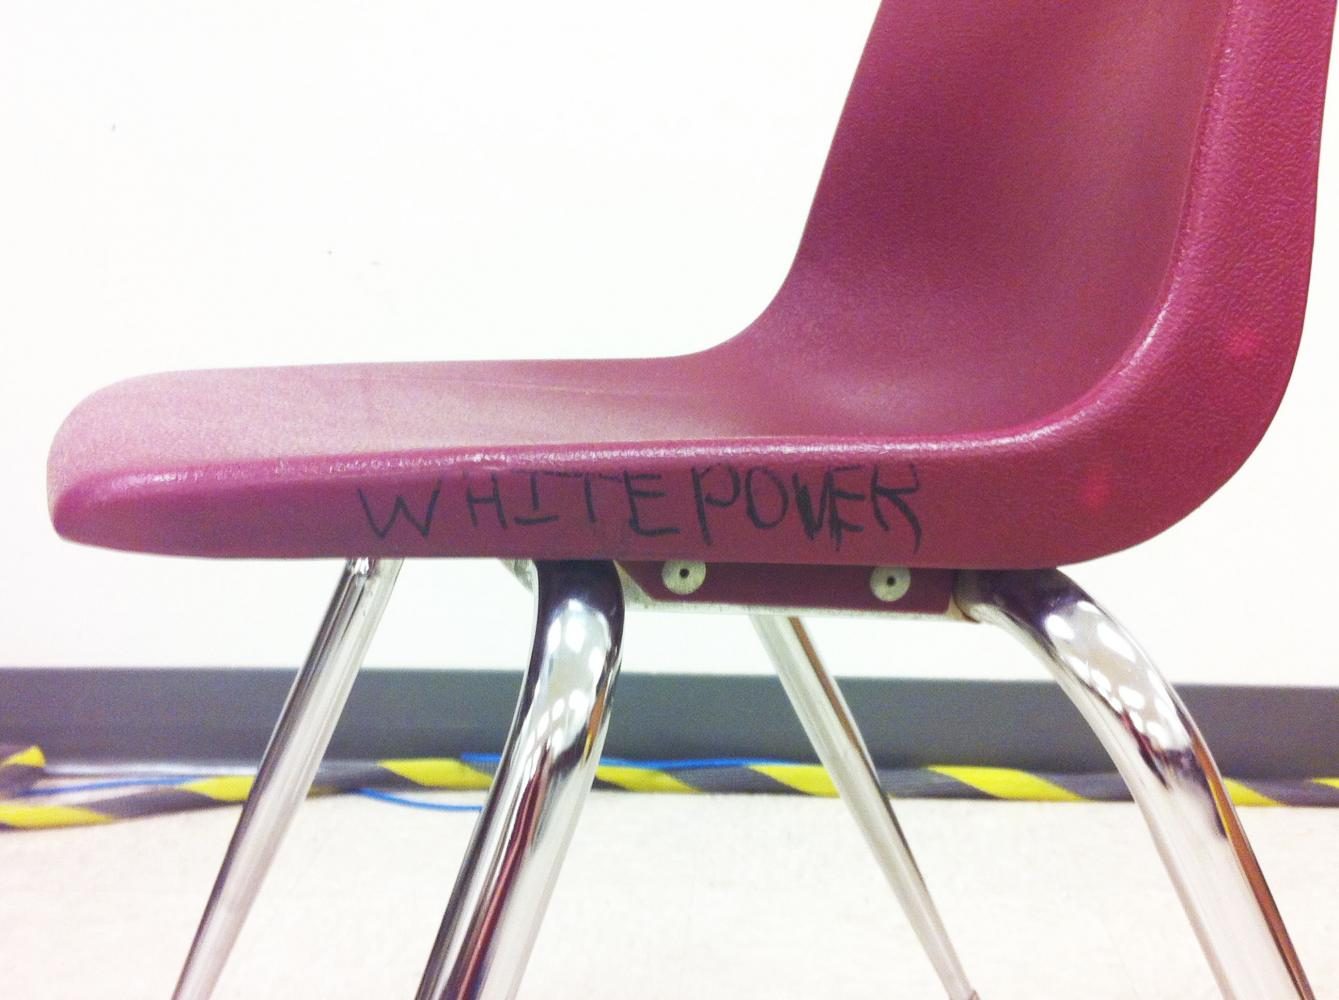 The words WHITE POWER are acratched onto a desk chair in an engineering classroom. It shows the lack of racial tolerance that exists in the Zone.